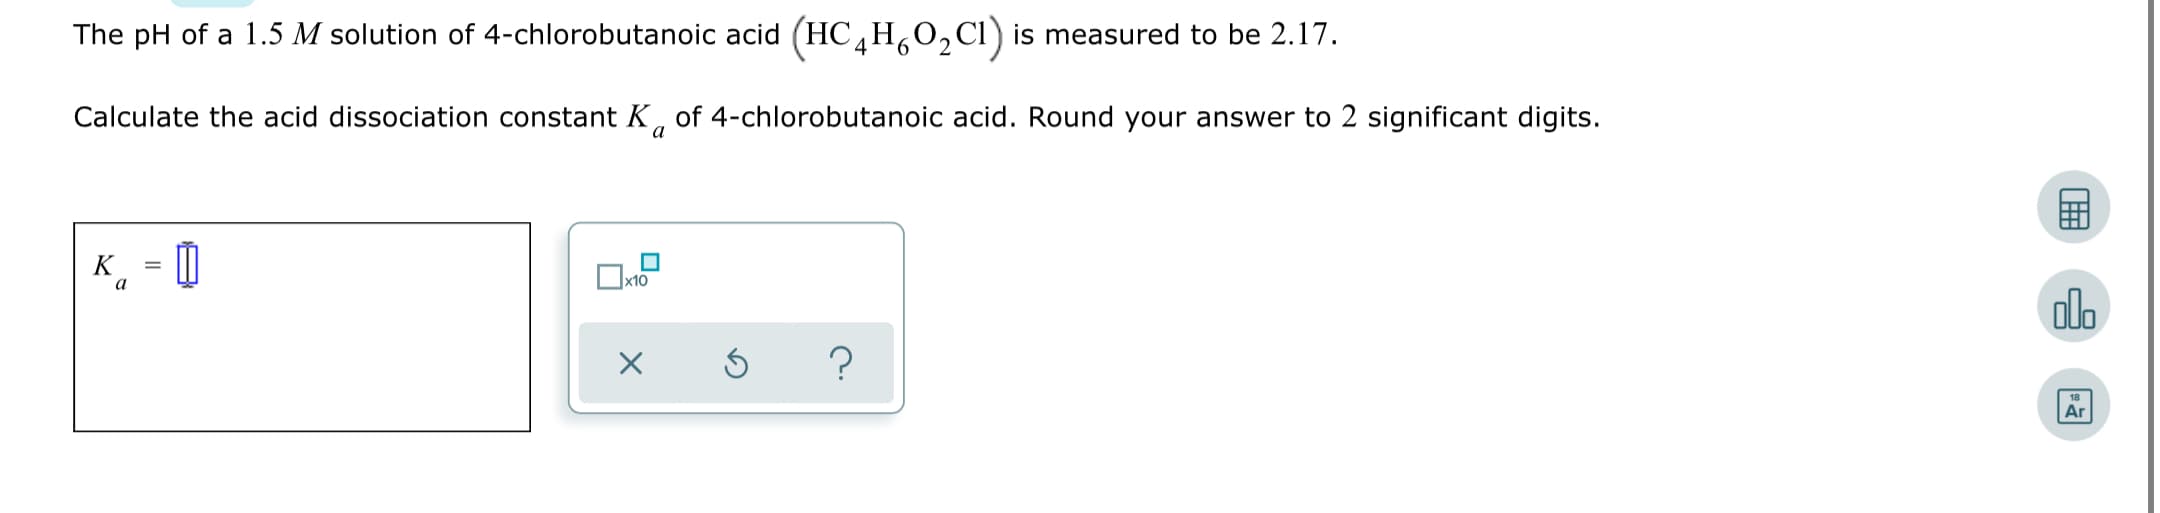 The pH of a 1.5 M solution of 4-chlorobutanoic acid (HC H,0,Cl) is measured to be 2.17.
4
6.
2.
Calculate the acid dissociation constant K, of 4-chlorobutanoic acid. Round your answer to 2 significant digits.
K
olo
Ar
